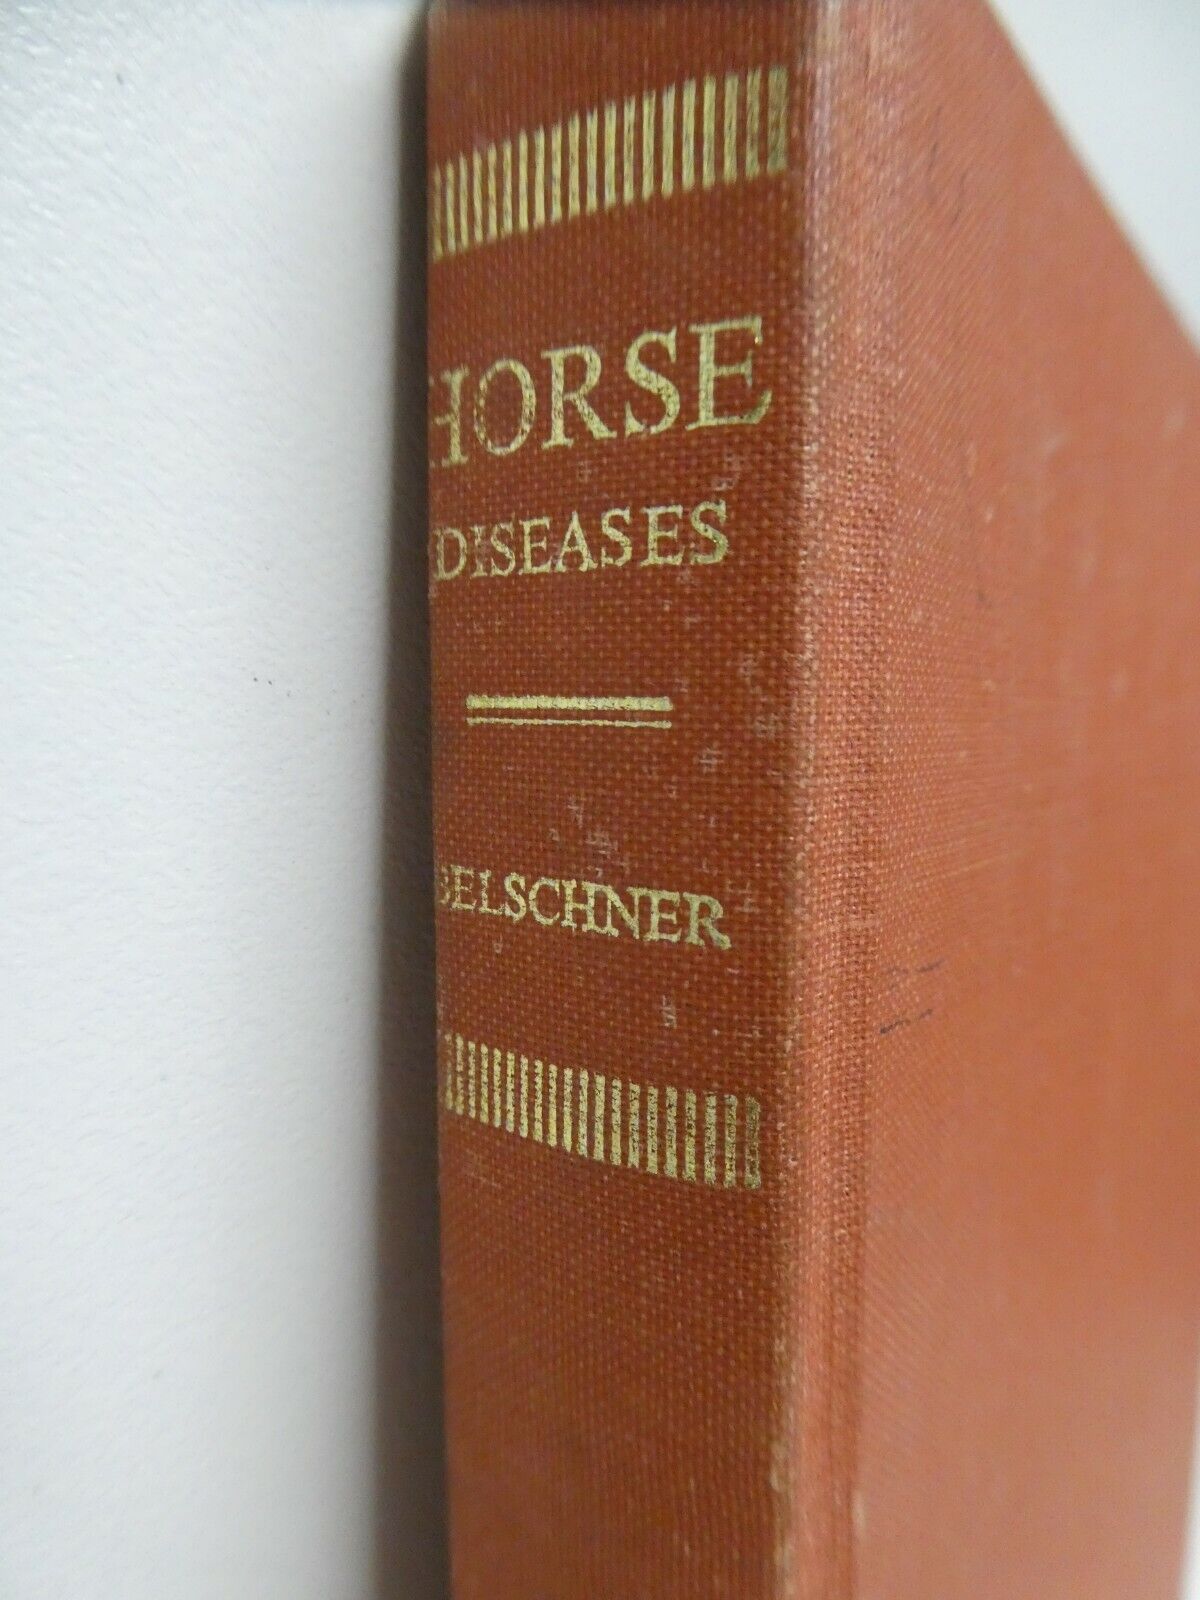 HORSE DISEASES BELSCHNER 1969 ANGUS AND ROBERTSON